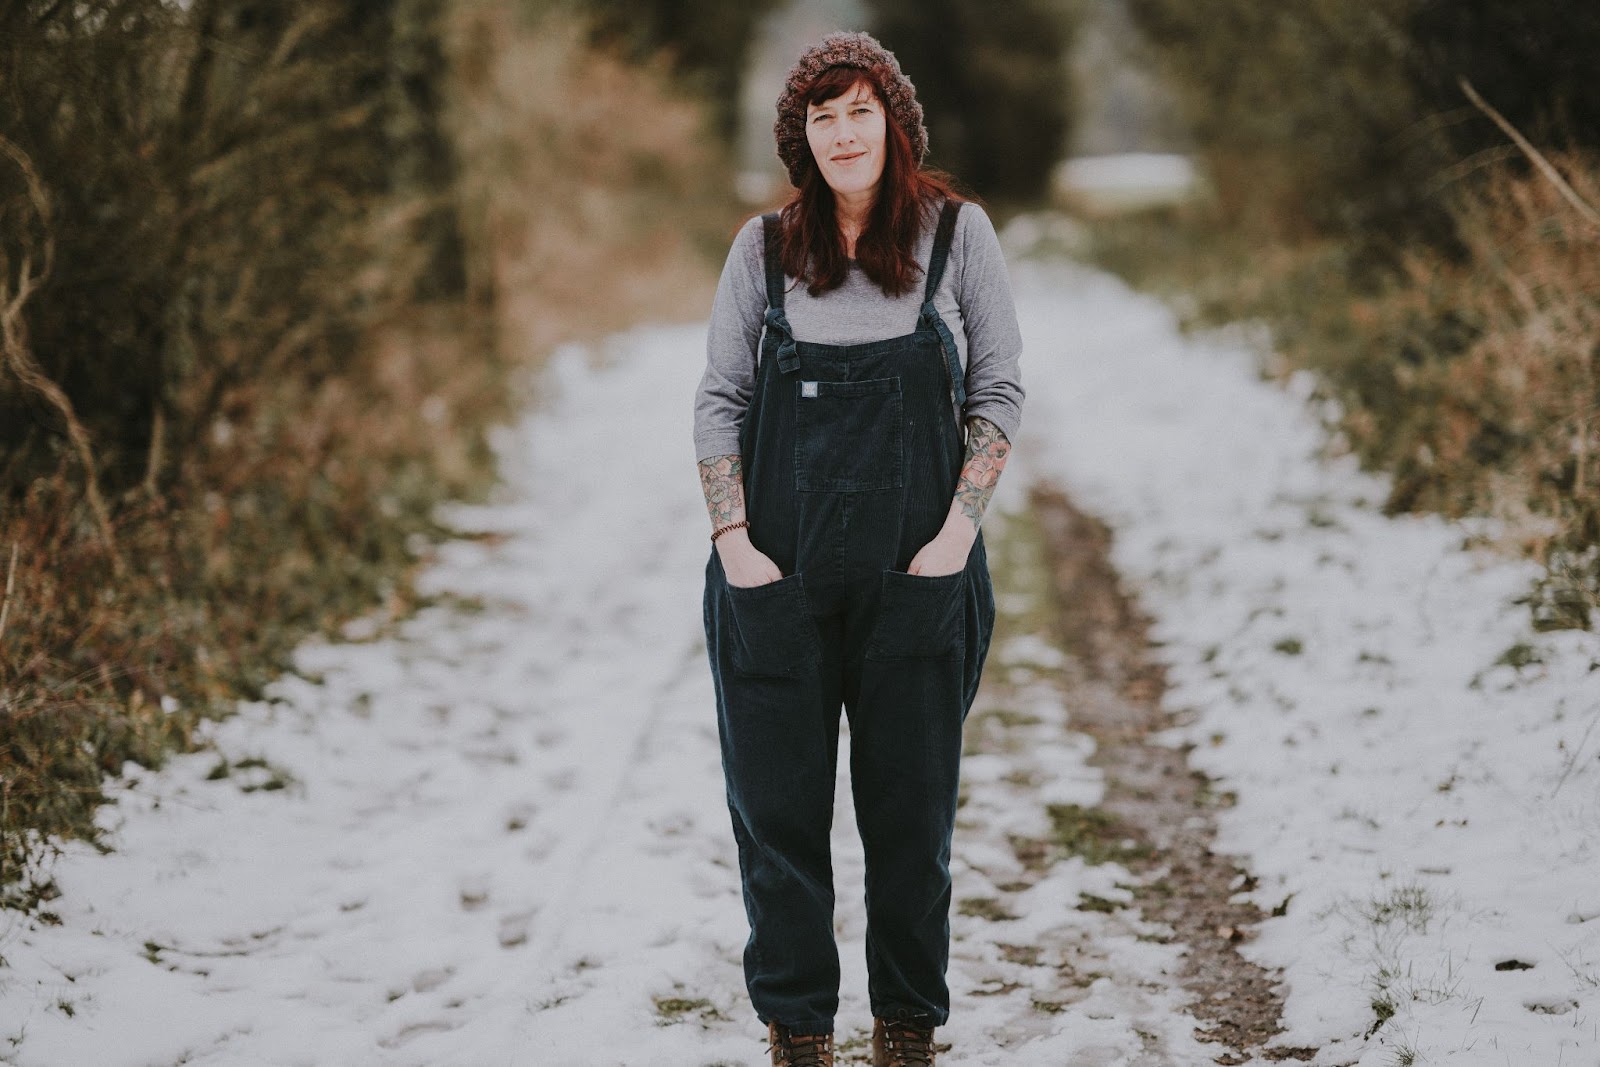 a woman standing on a dirt road with snow on it, wearing a knitted hat and coveralls, and a shirt with her forearms exposed to show two tattoo sleeves